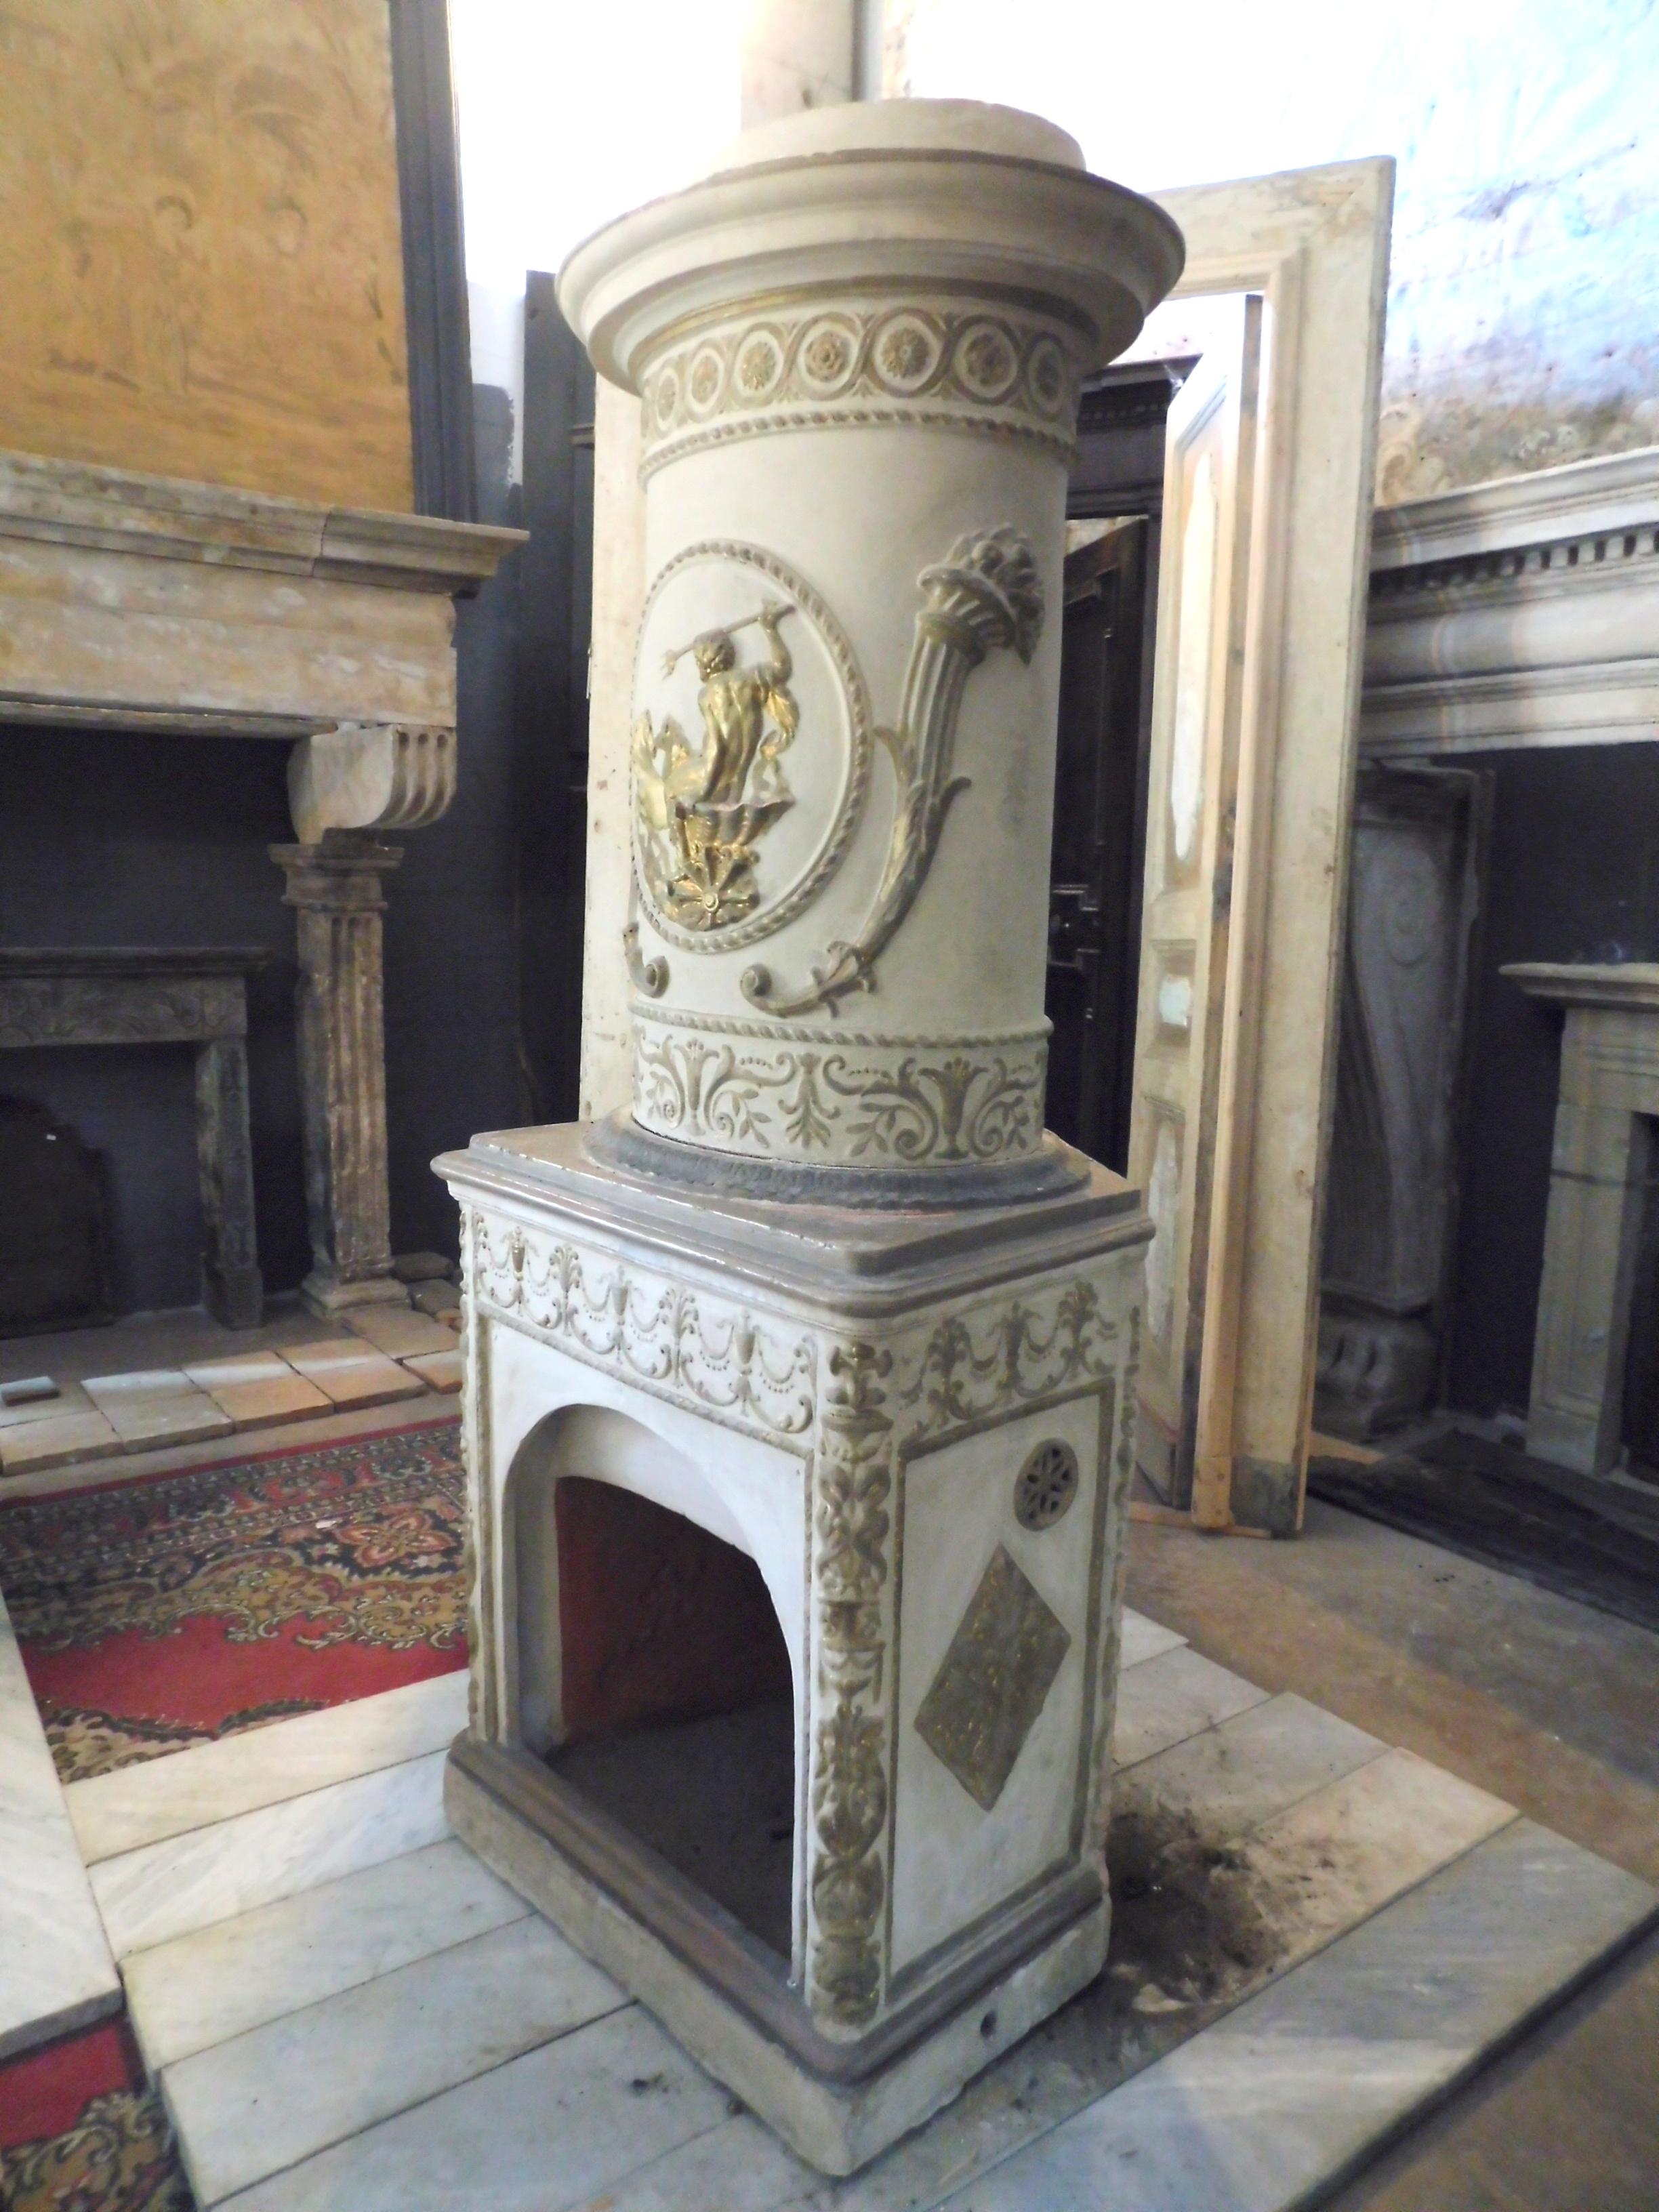 Antique ceramic stove, Italian-made ceramic white painted and gold decorations, on a red earth base as seen from the inside, covered with beautiful decoration of the time, hand carved that create an interesting texture, a typical Italian product